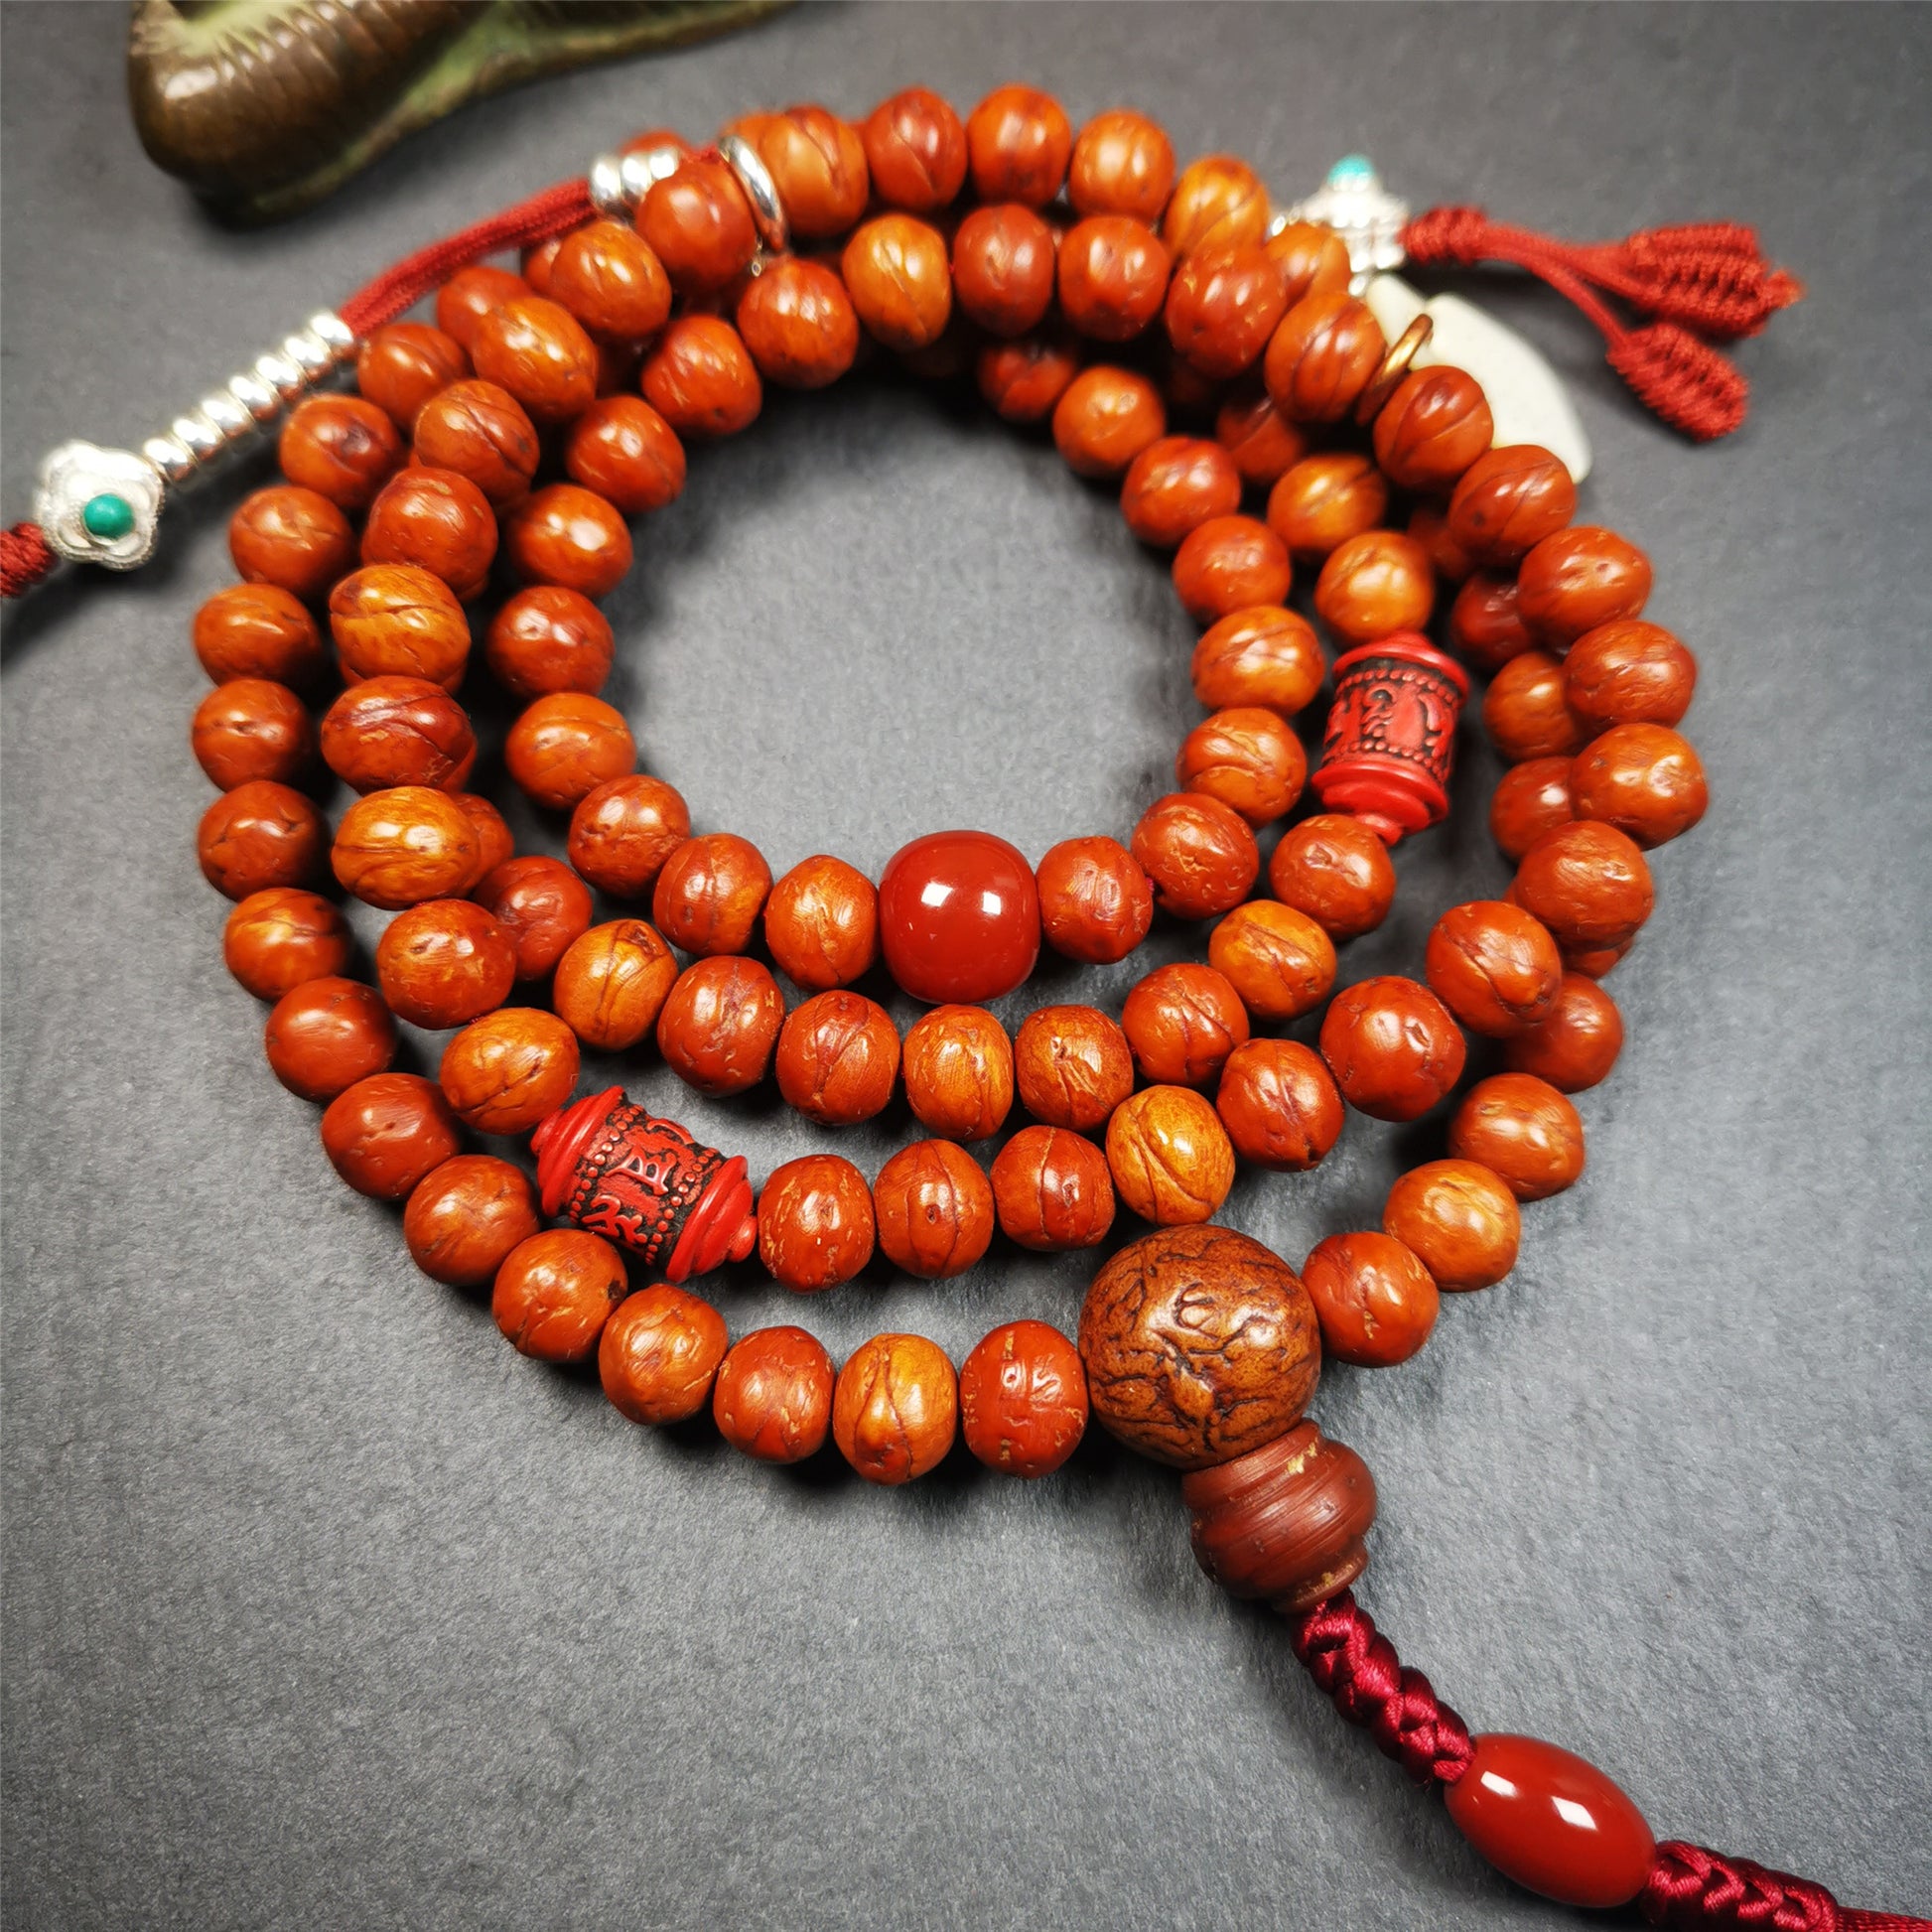 This bodhi beads mala is made by Tibetan craftsmen,about 30 years old.  It is composed of 108 bodhi seed beads, equipped with agate beads, cinnabar beads,silver bead counters are installed on both sides, 1 mantra dot clip,and finally consists a guru bead and agate bead on the end, very elegant.